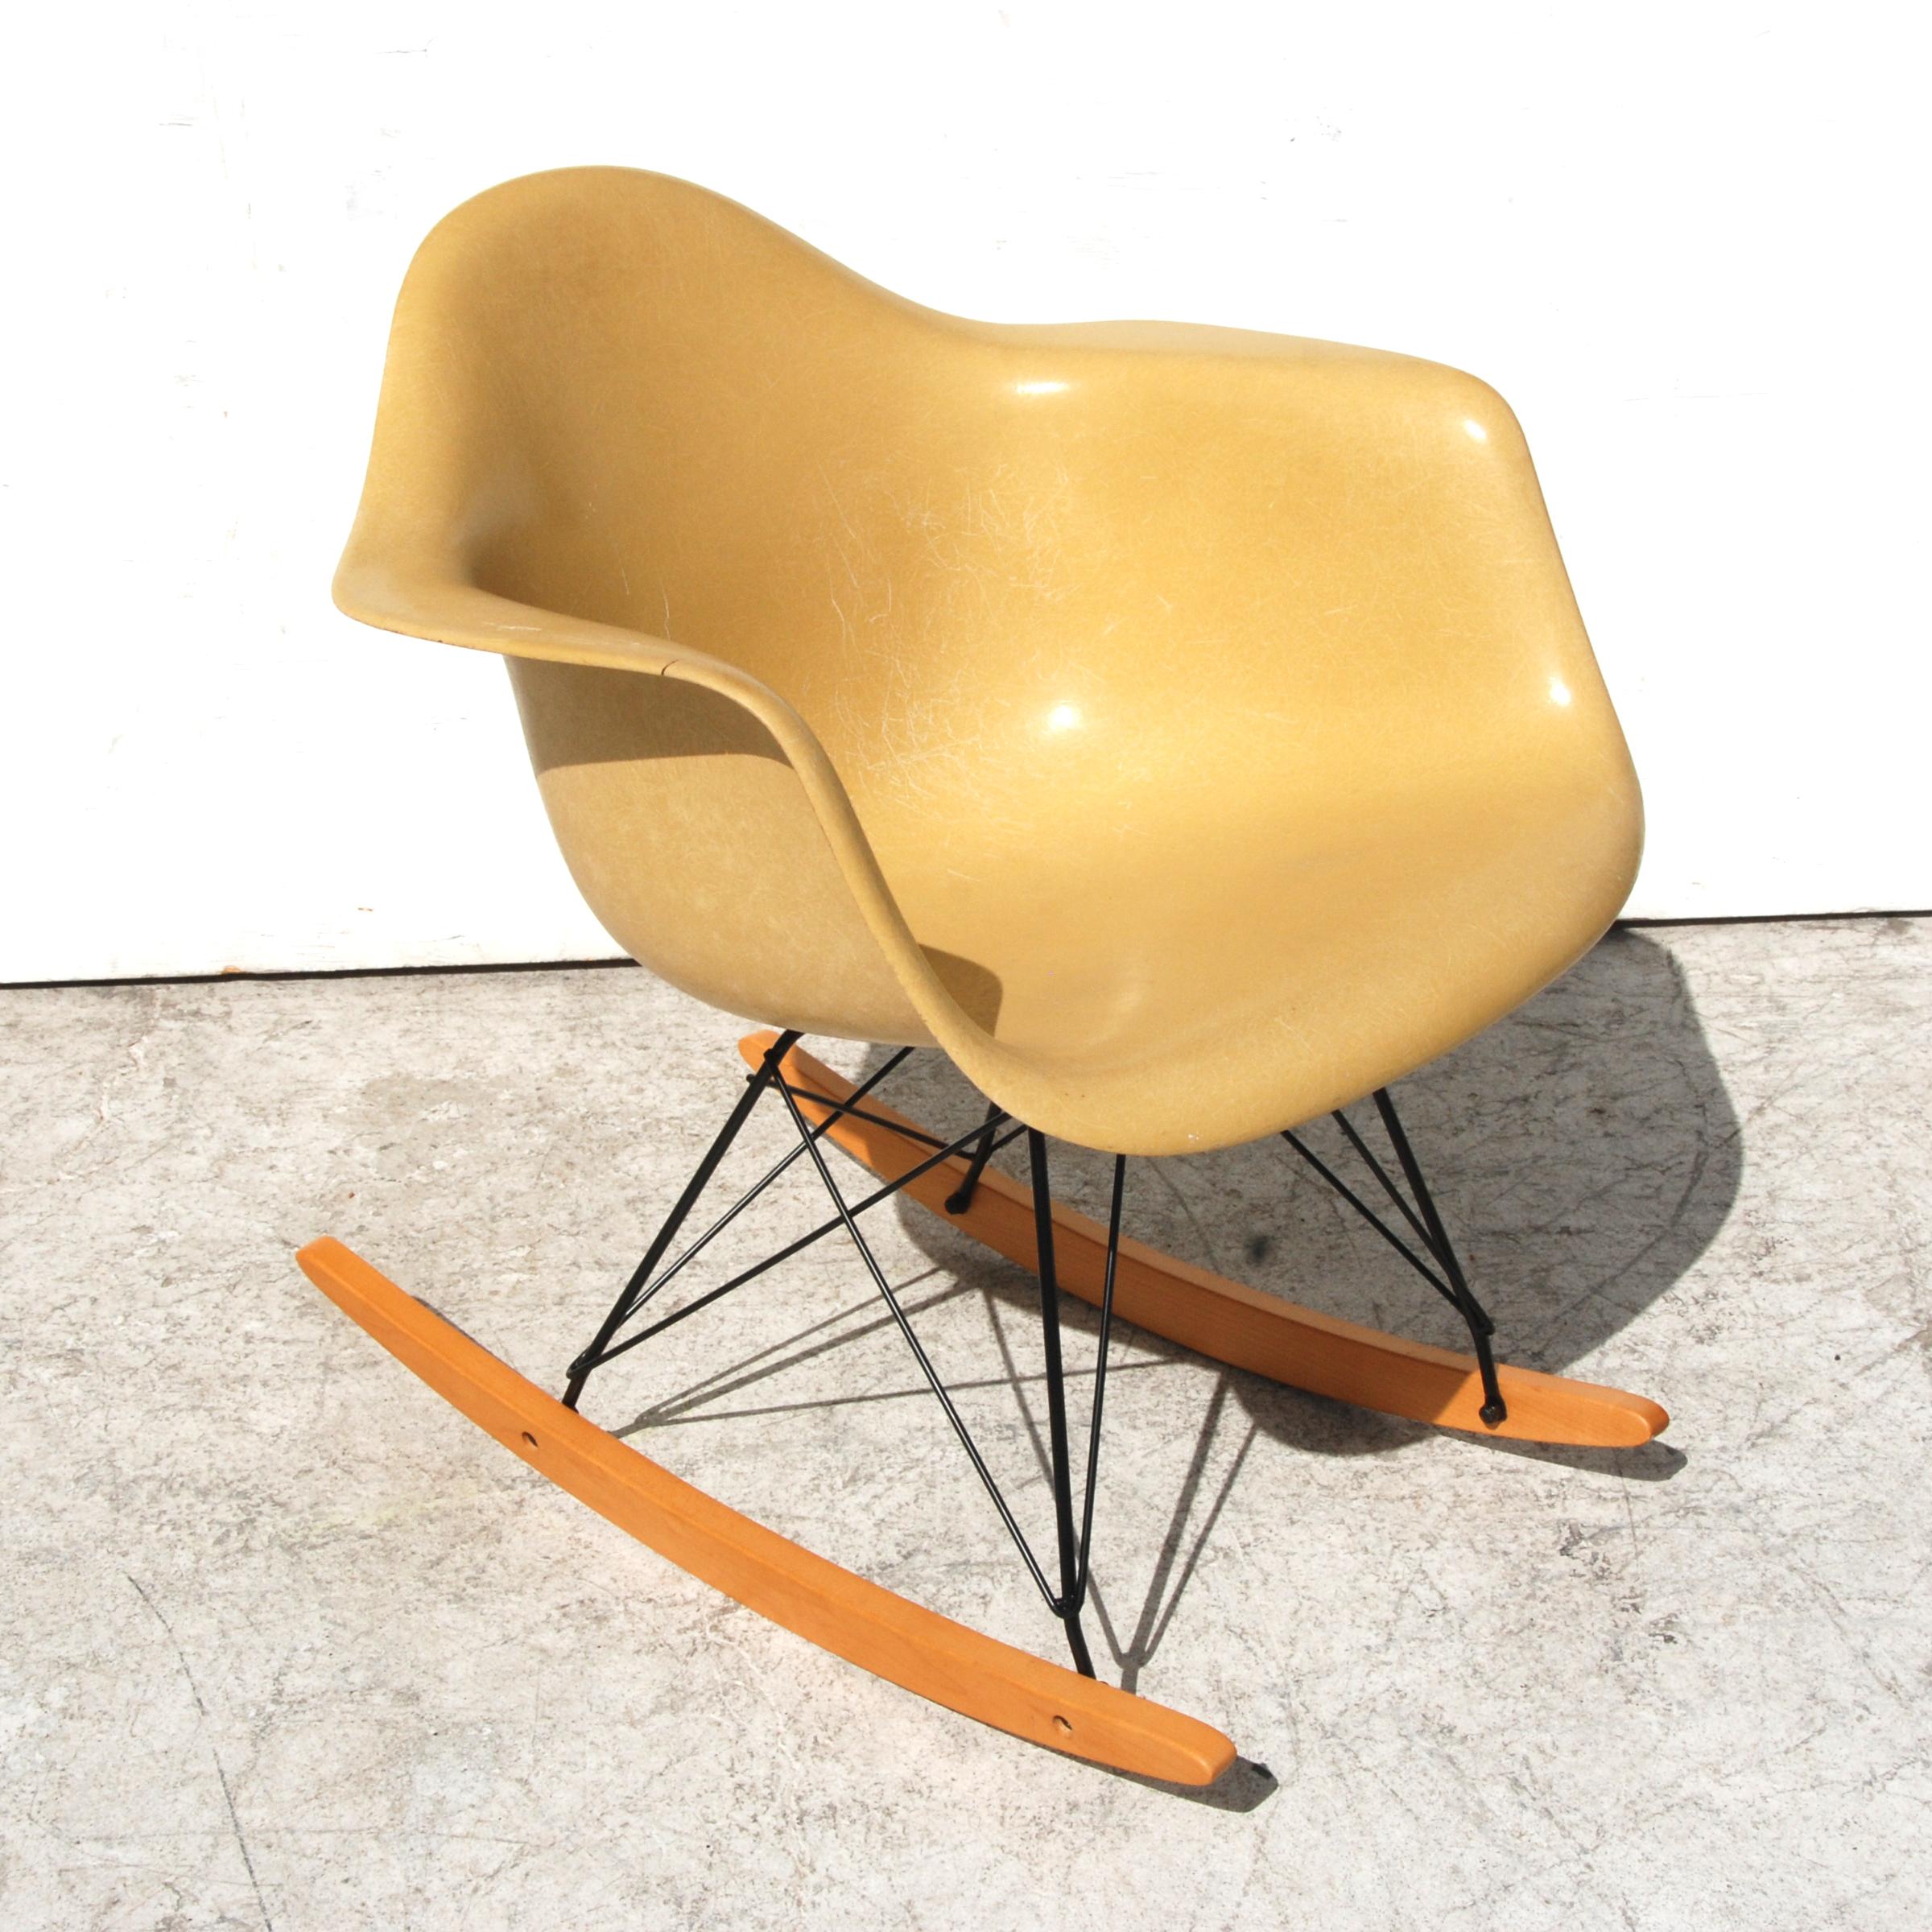 Herman Miller yellow armed shell fiberglass rocker designed by Eames

Manufactured in the 1970s, this rocker is one of the most iconic designs from Charles and Ray Eames.

Base is new and features oak runners.

Signed, and guaranteed authentic.